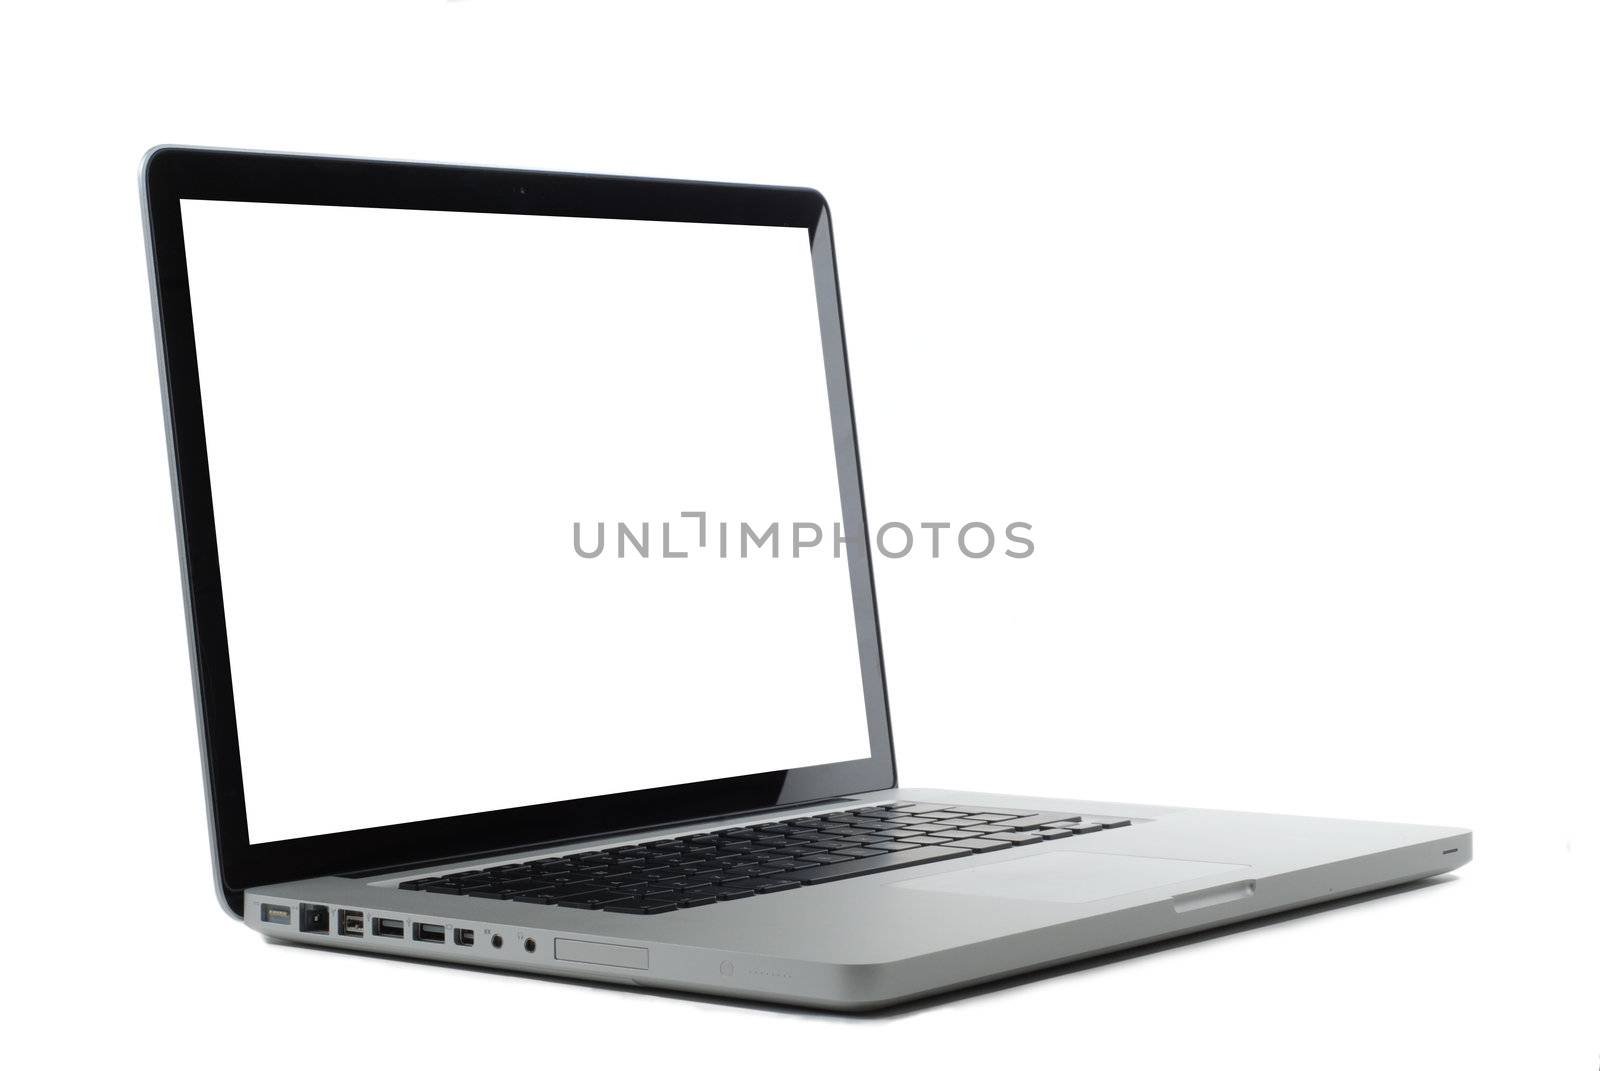 Laptop isolated on white by Gjermund